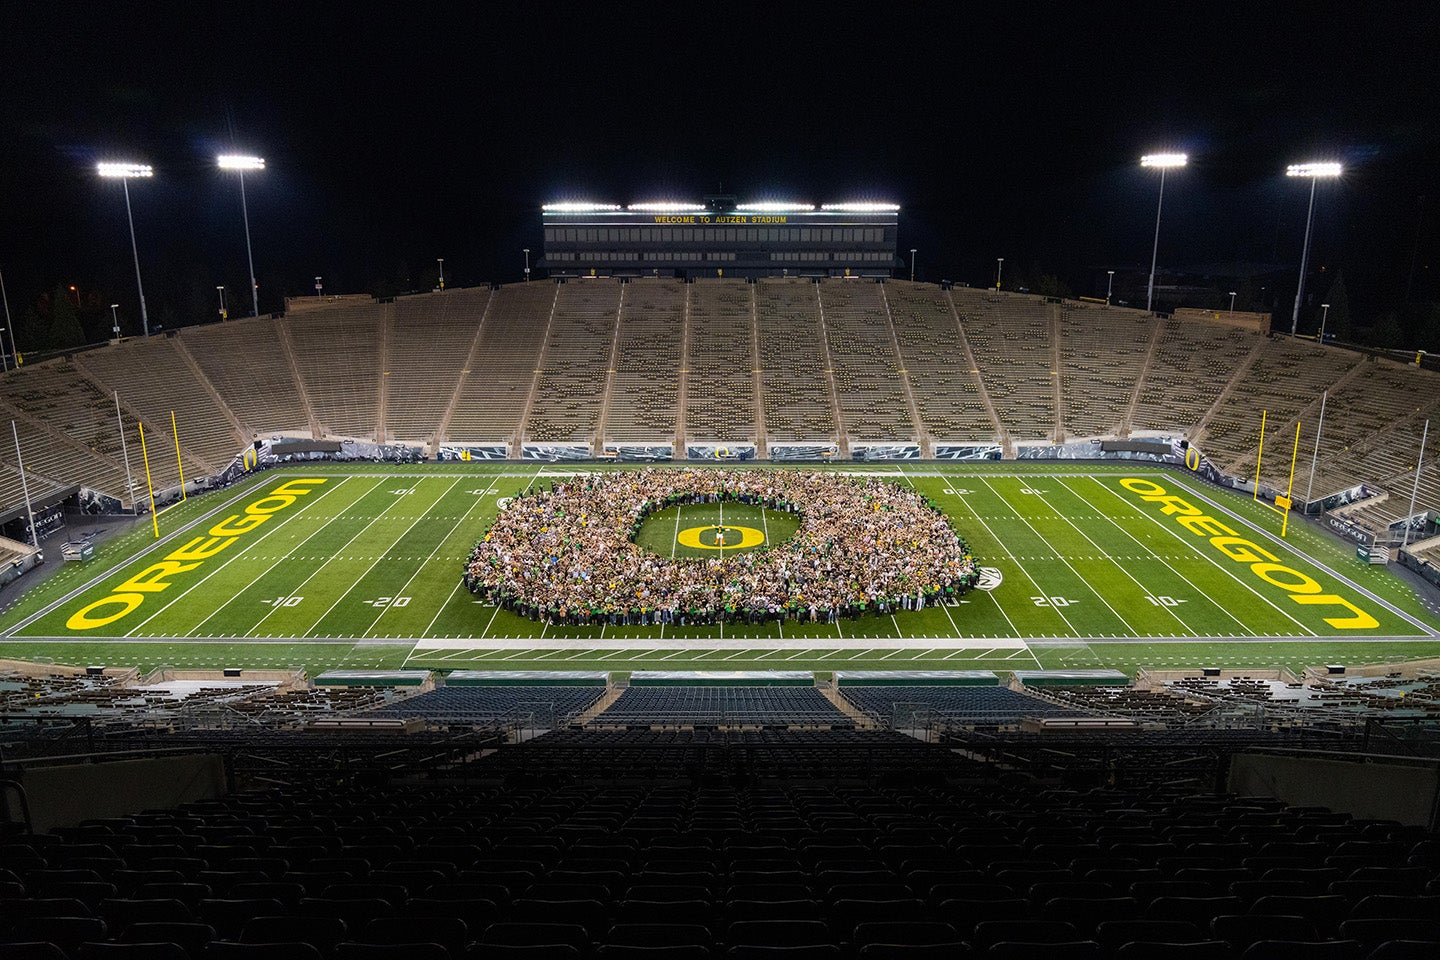 Class of 2024 at Autzen Stadium standing in a pattern of the O logo